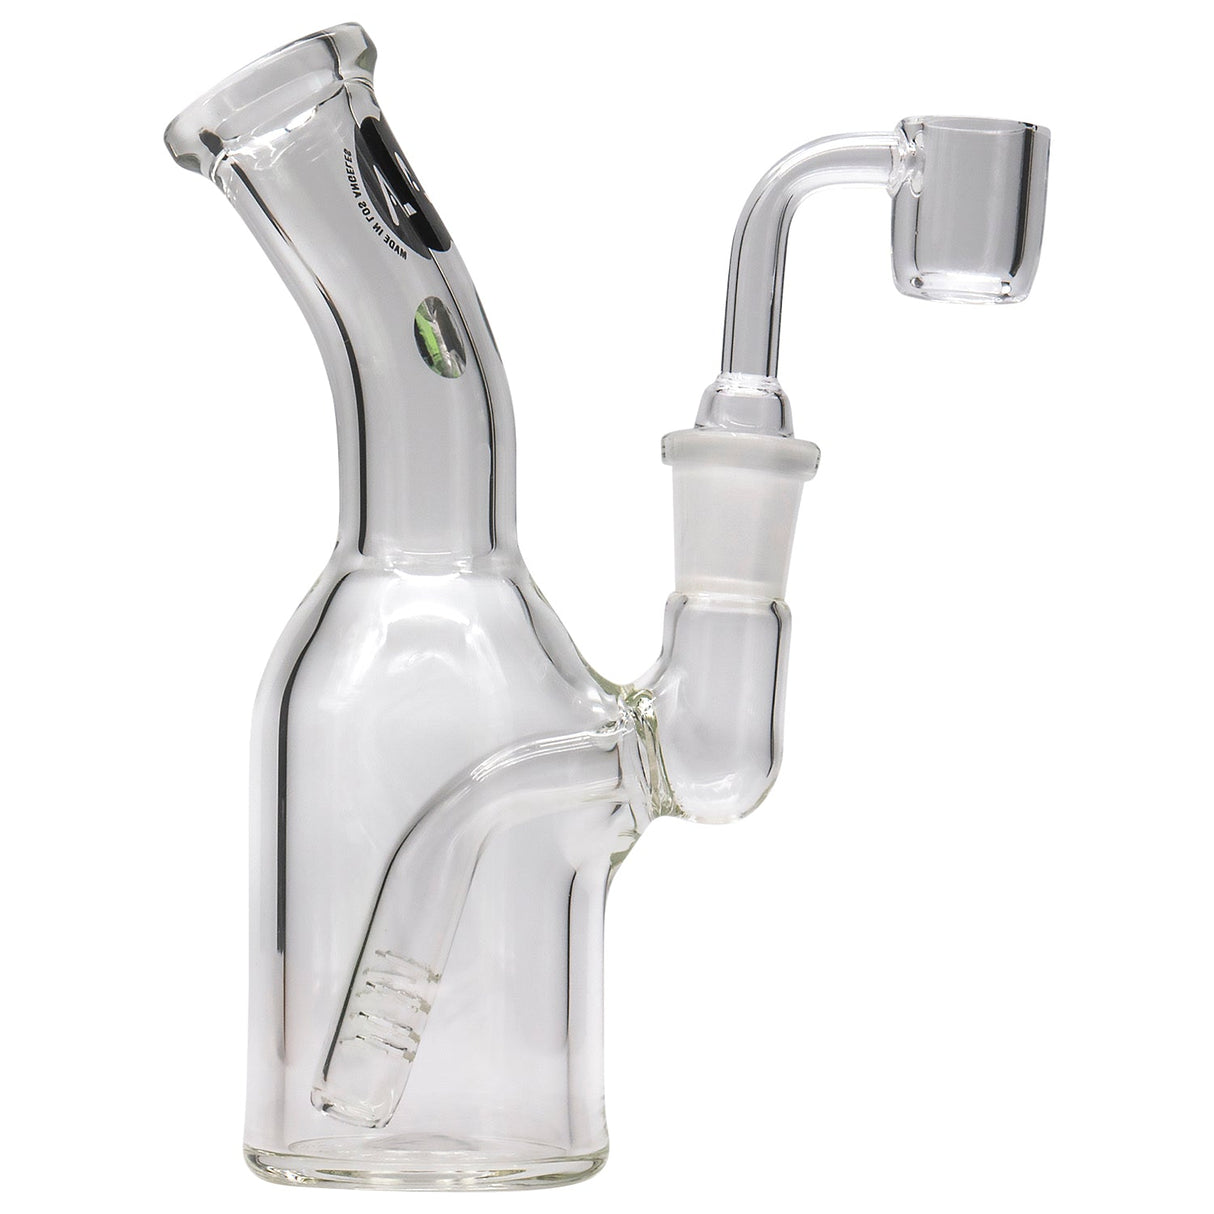 LA Pipes Compact Bent Neck Waterpipe for Concentrates with Quartz Banger - Side View